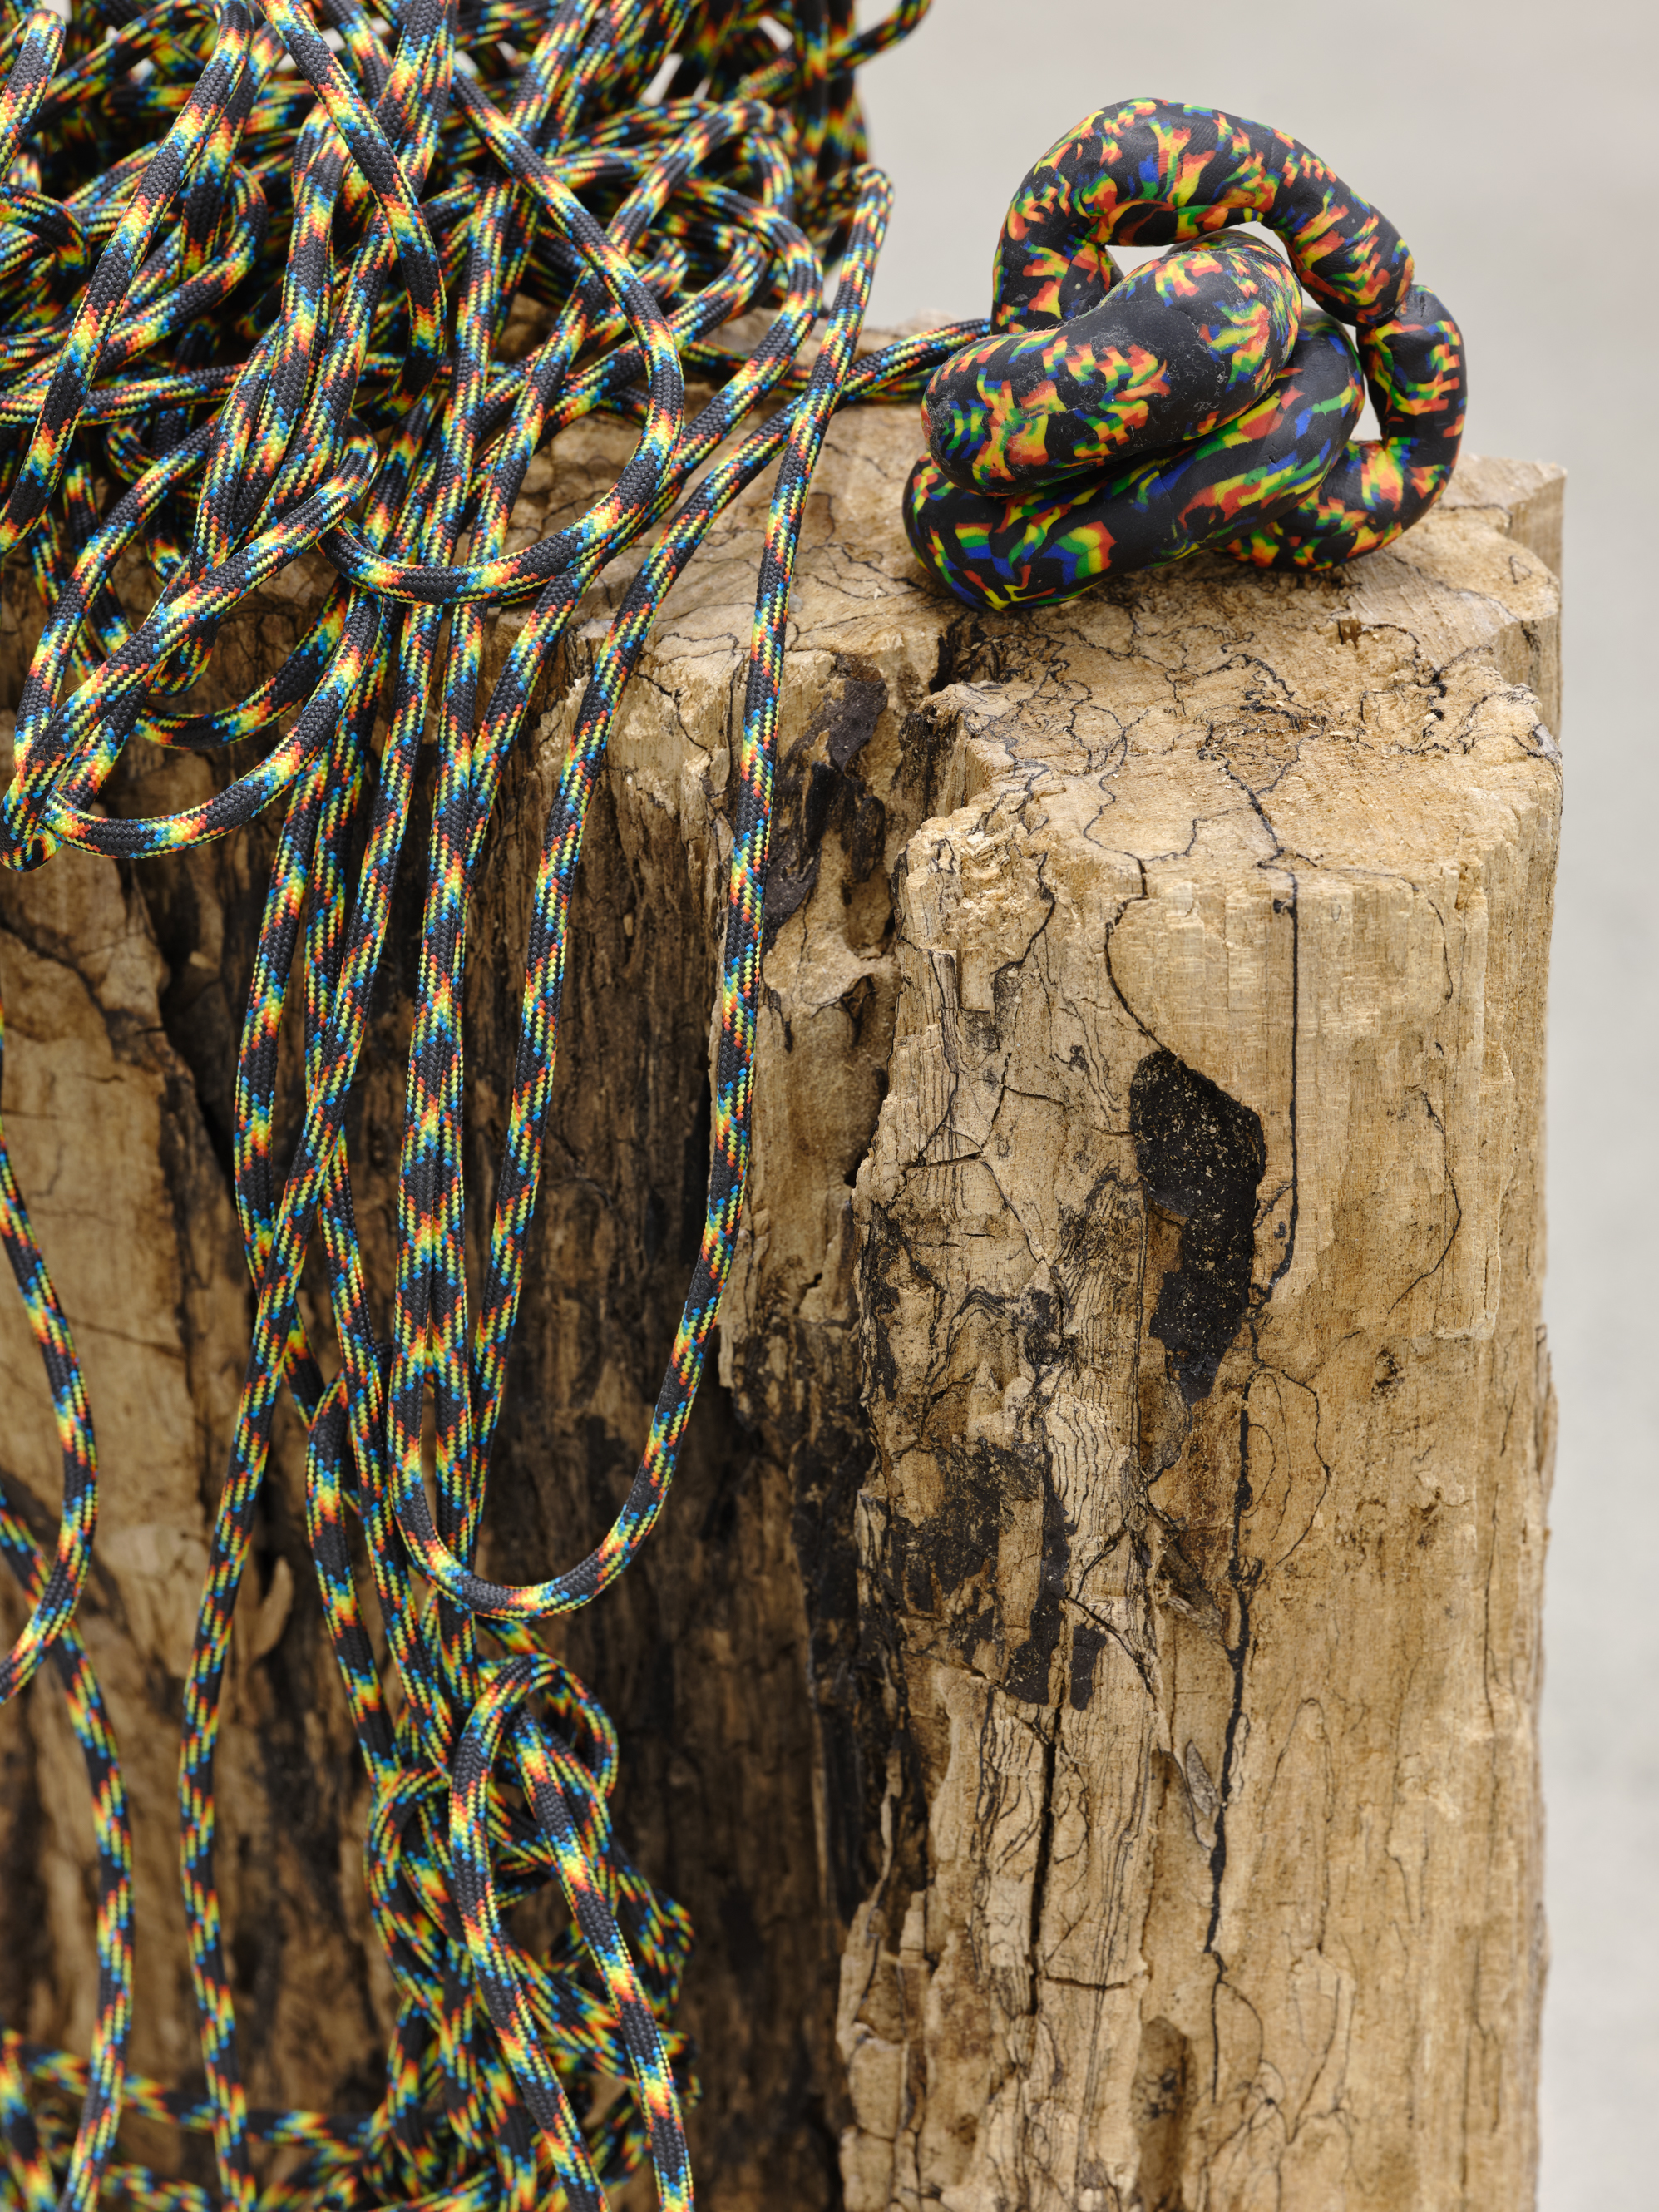 ​Valérie Blass, On ne trouve que ce l’an cherche (l’archéologie) (detail), 2021, wood, polymer clay, rope, marble, 31 x 16 x 18 in. (79 x 41 x 46 cm)​ by 